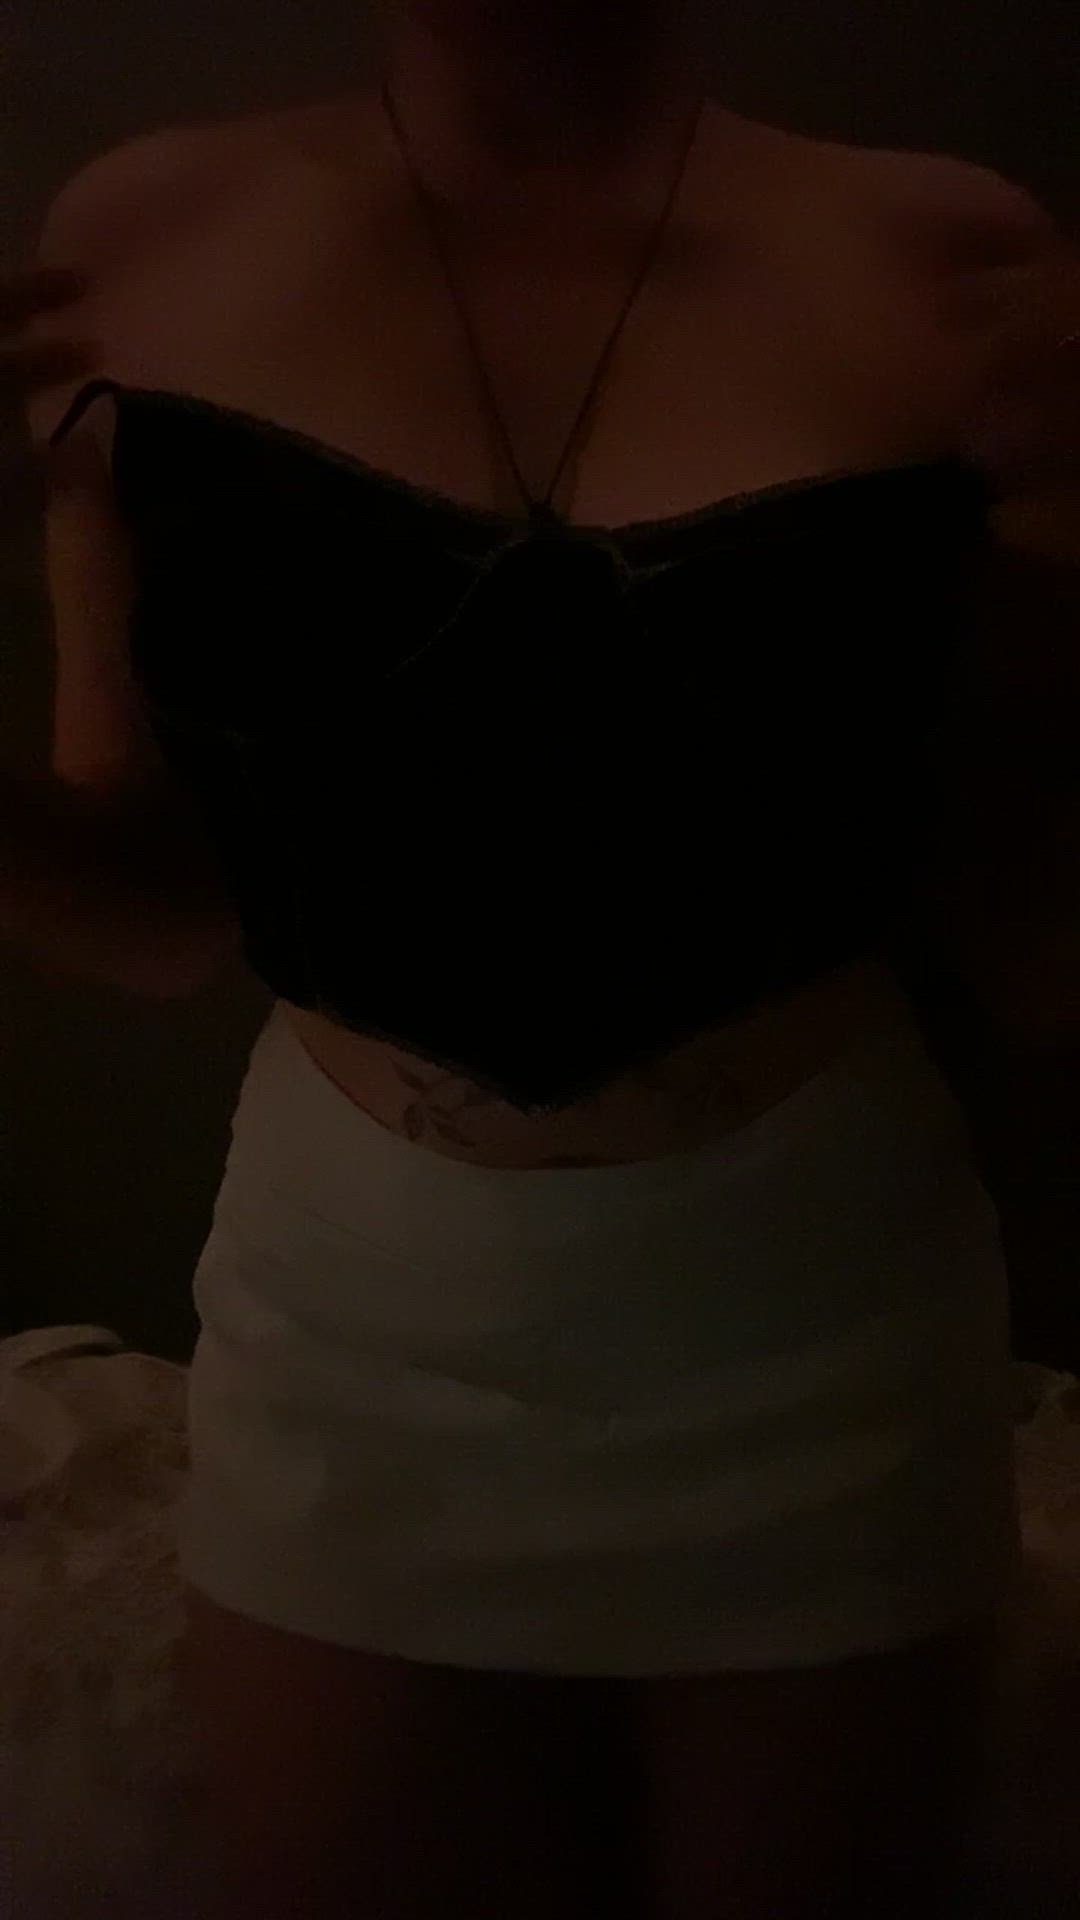 Tits porn video with onlyfans model brattyqueerxo00 <strong>@bradley.rose</strong>